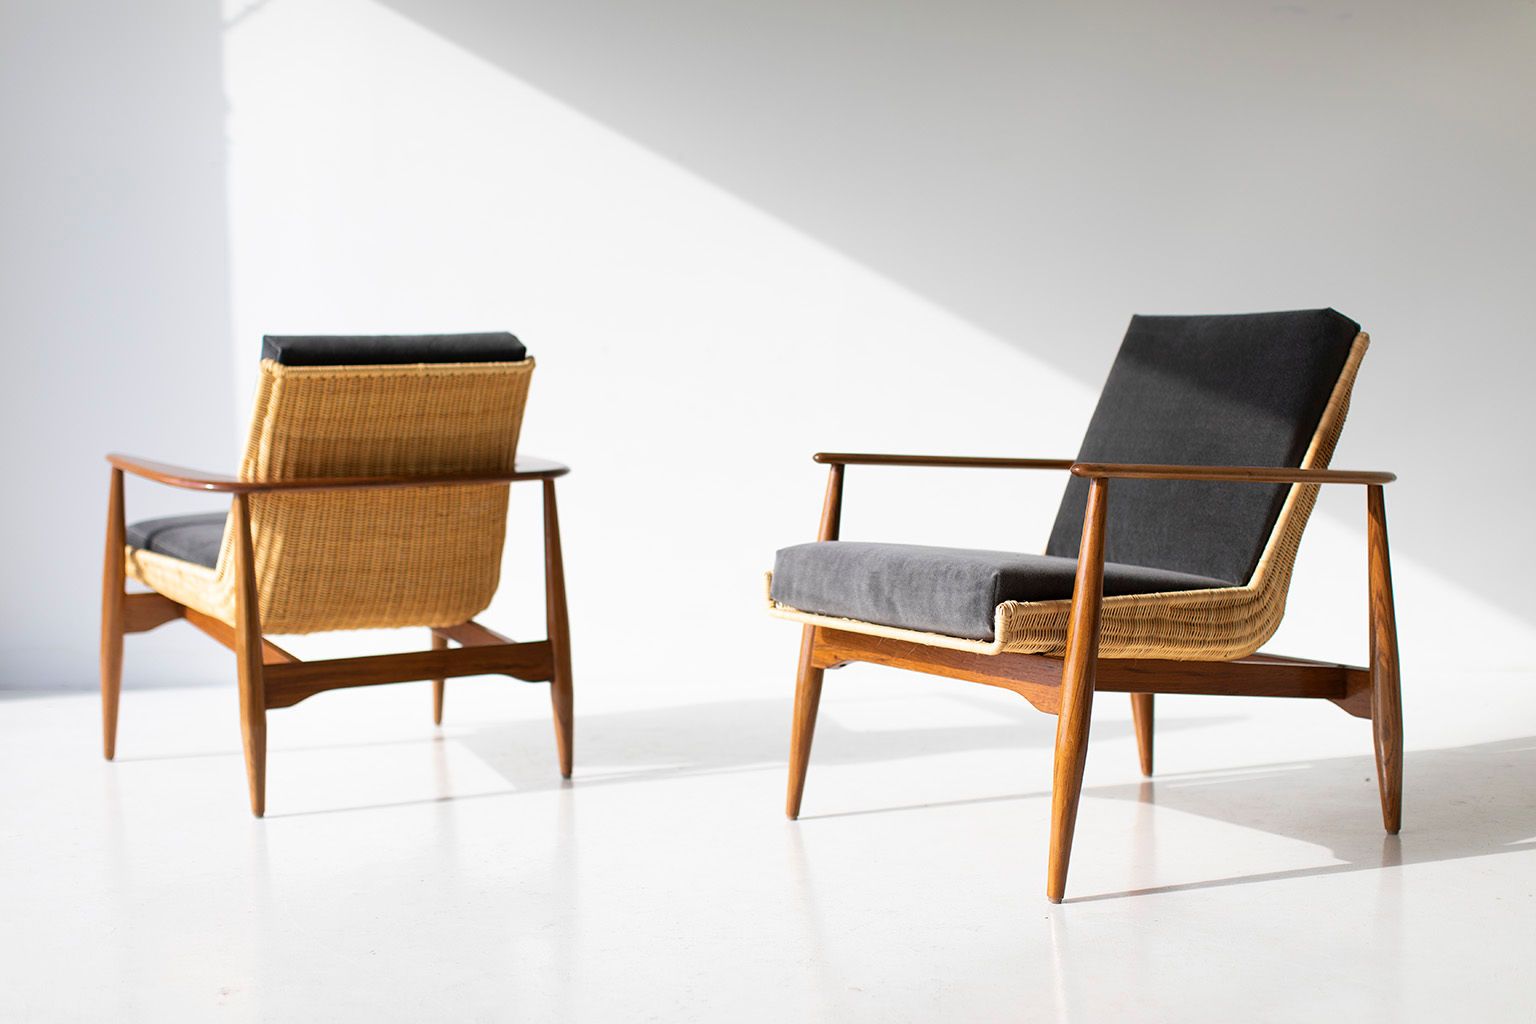 Lawrence-Peabody-Wicker-Lounge-Chairs-04